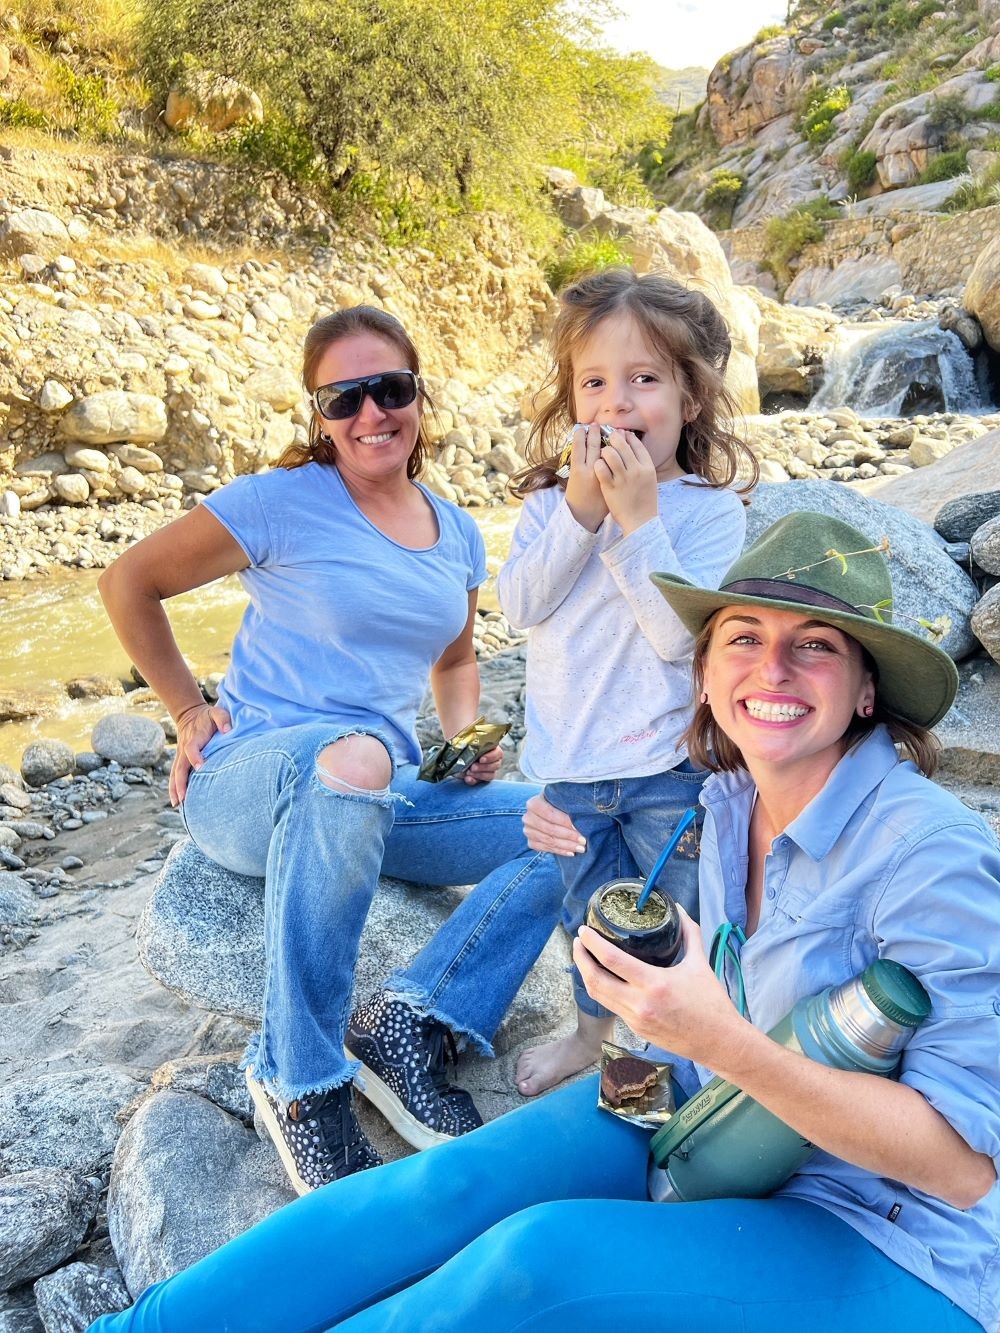 Enjoying mate tea & alfajores cookies with friends Picu & Valeria in Northern Argentina – a sweet & simple tradition that can easily be woven into event experiences